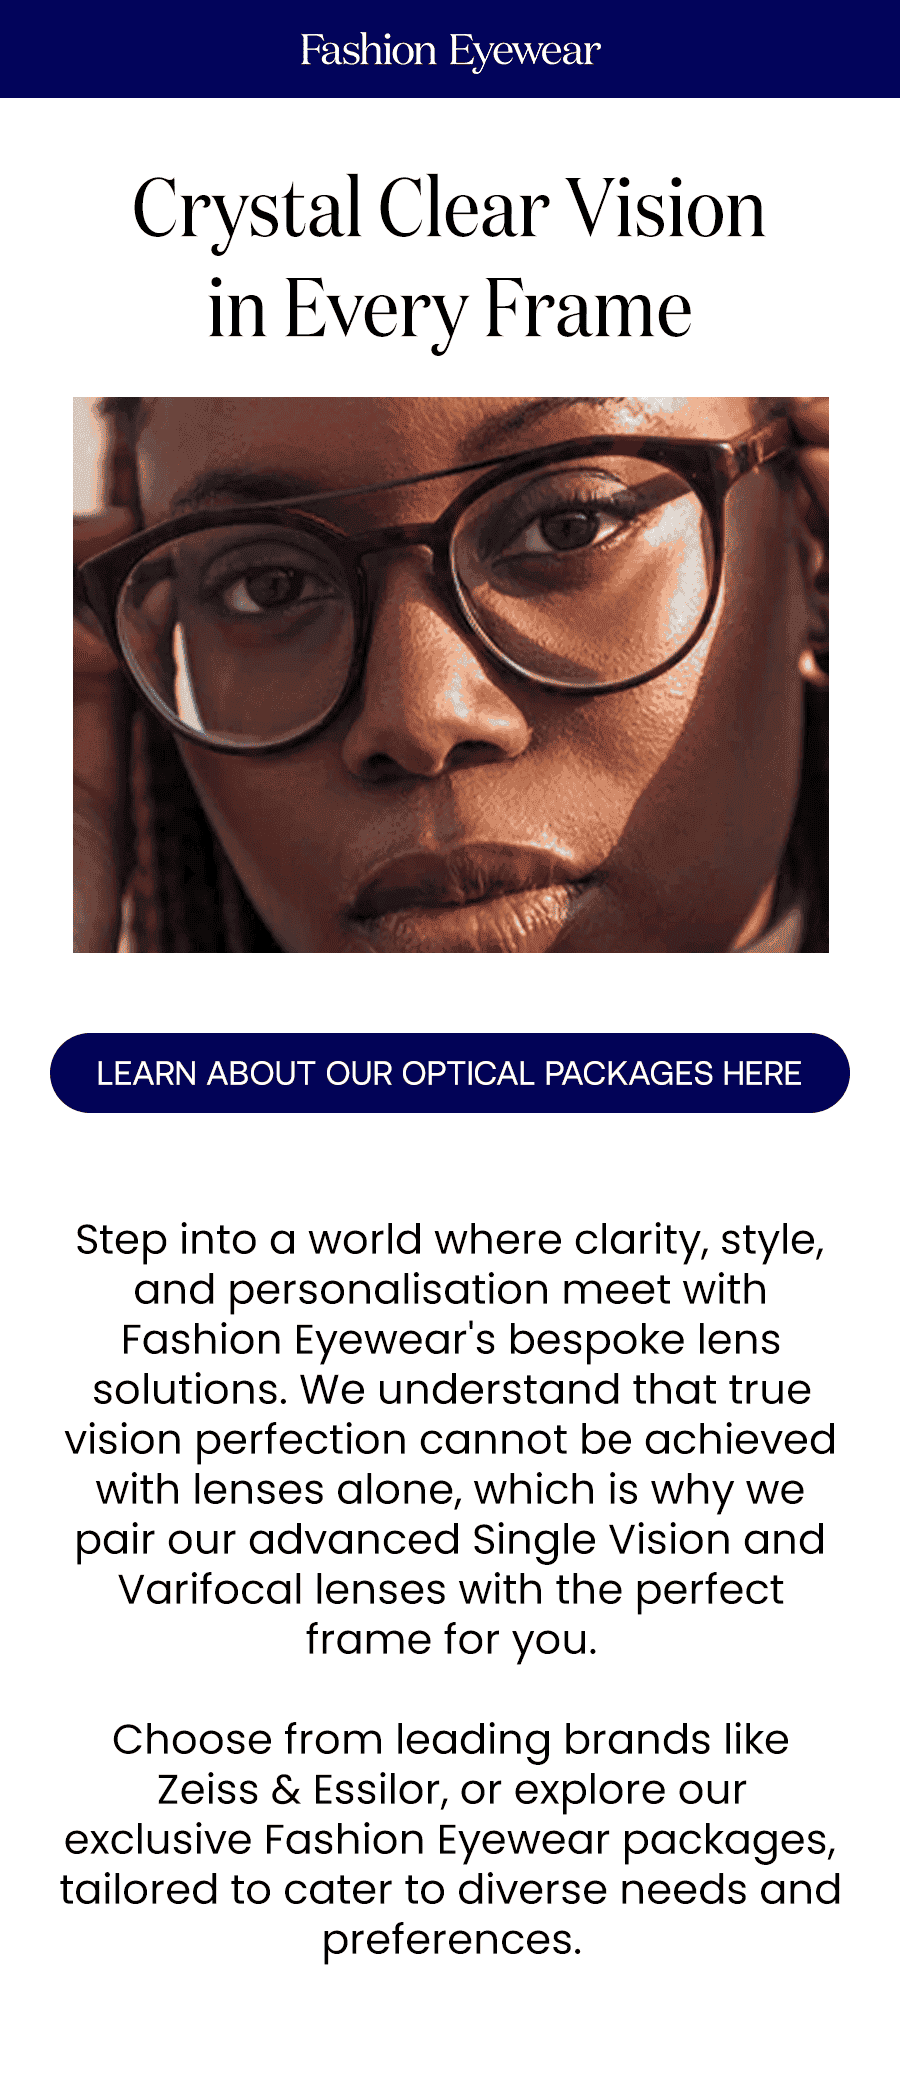 Embrace unparalleled clarity and style with Fashion Eyewear's exclusive lens packages. Our curated selection ensures that your vision needs meet the latest in lens technology, offering you the perfect blend of function and fashion.